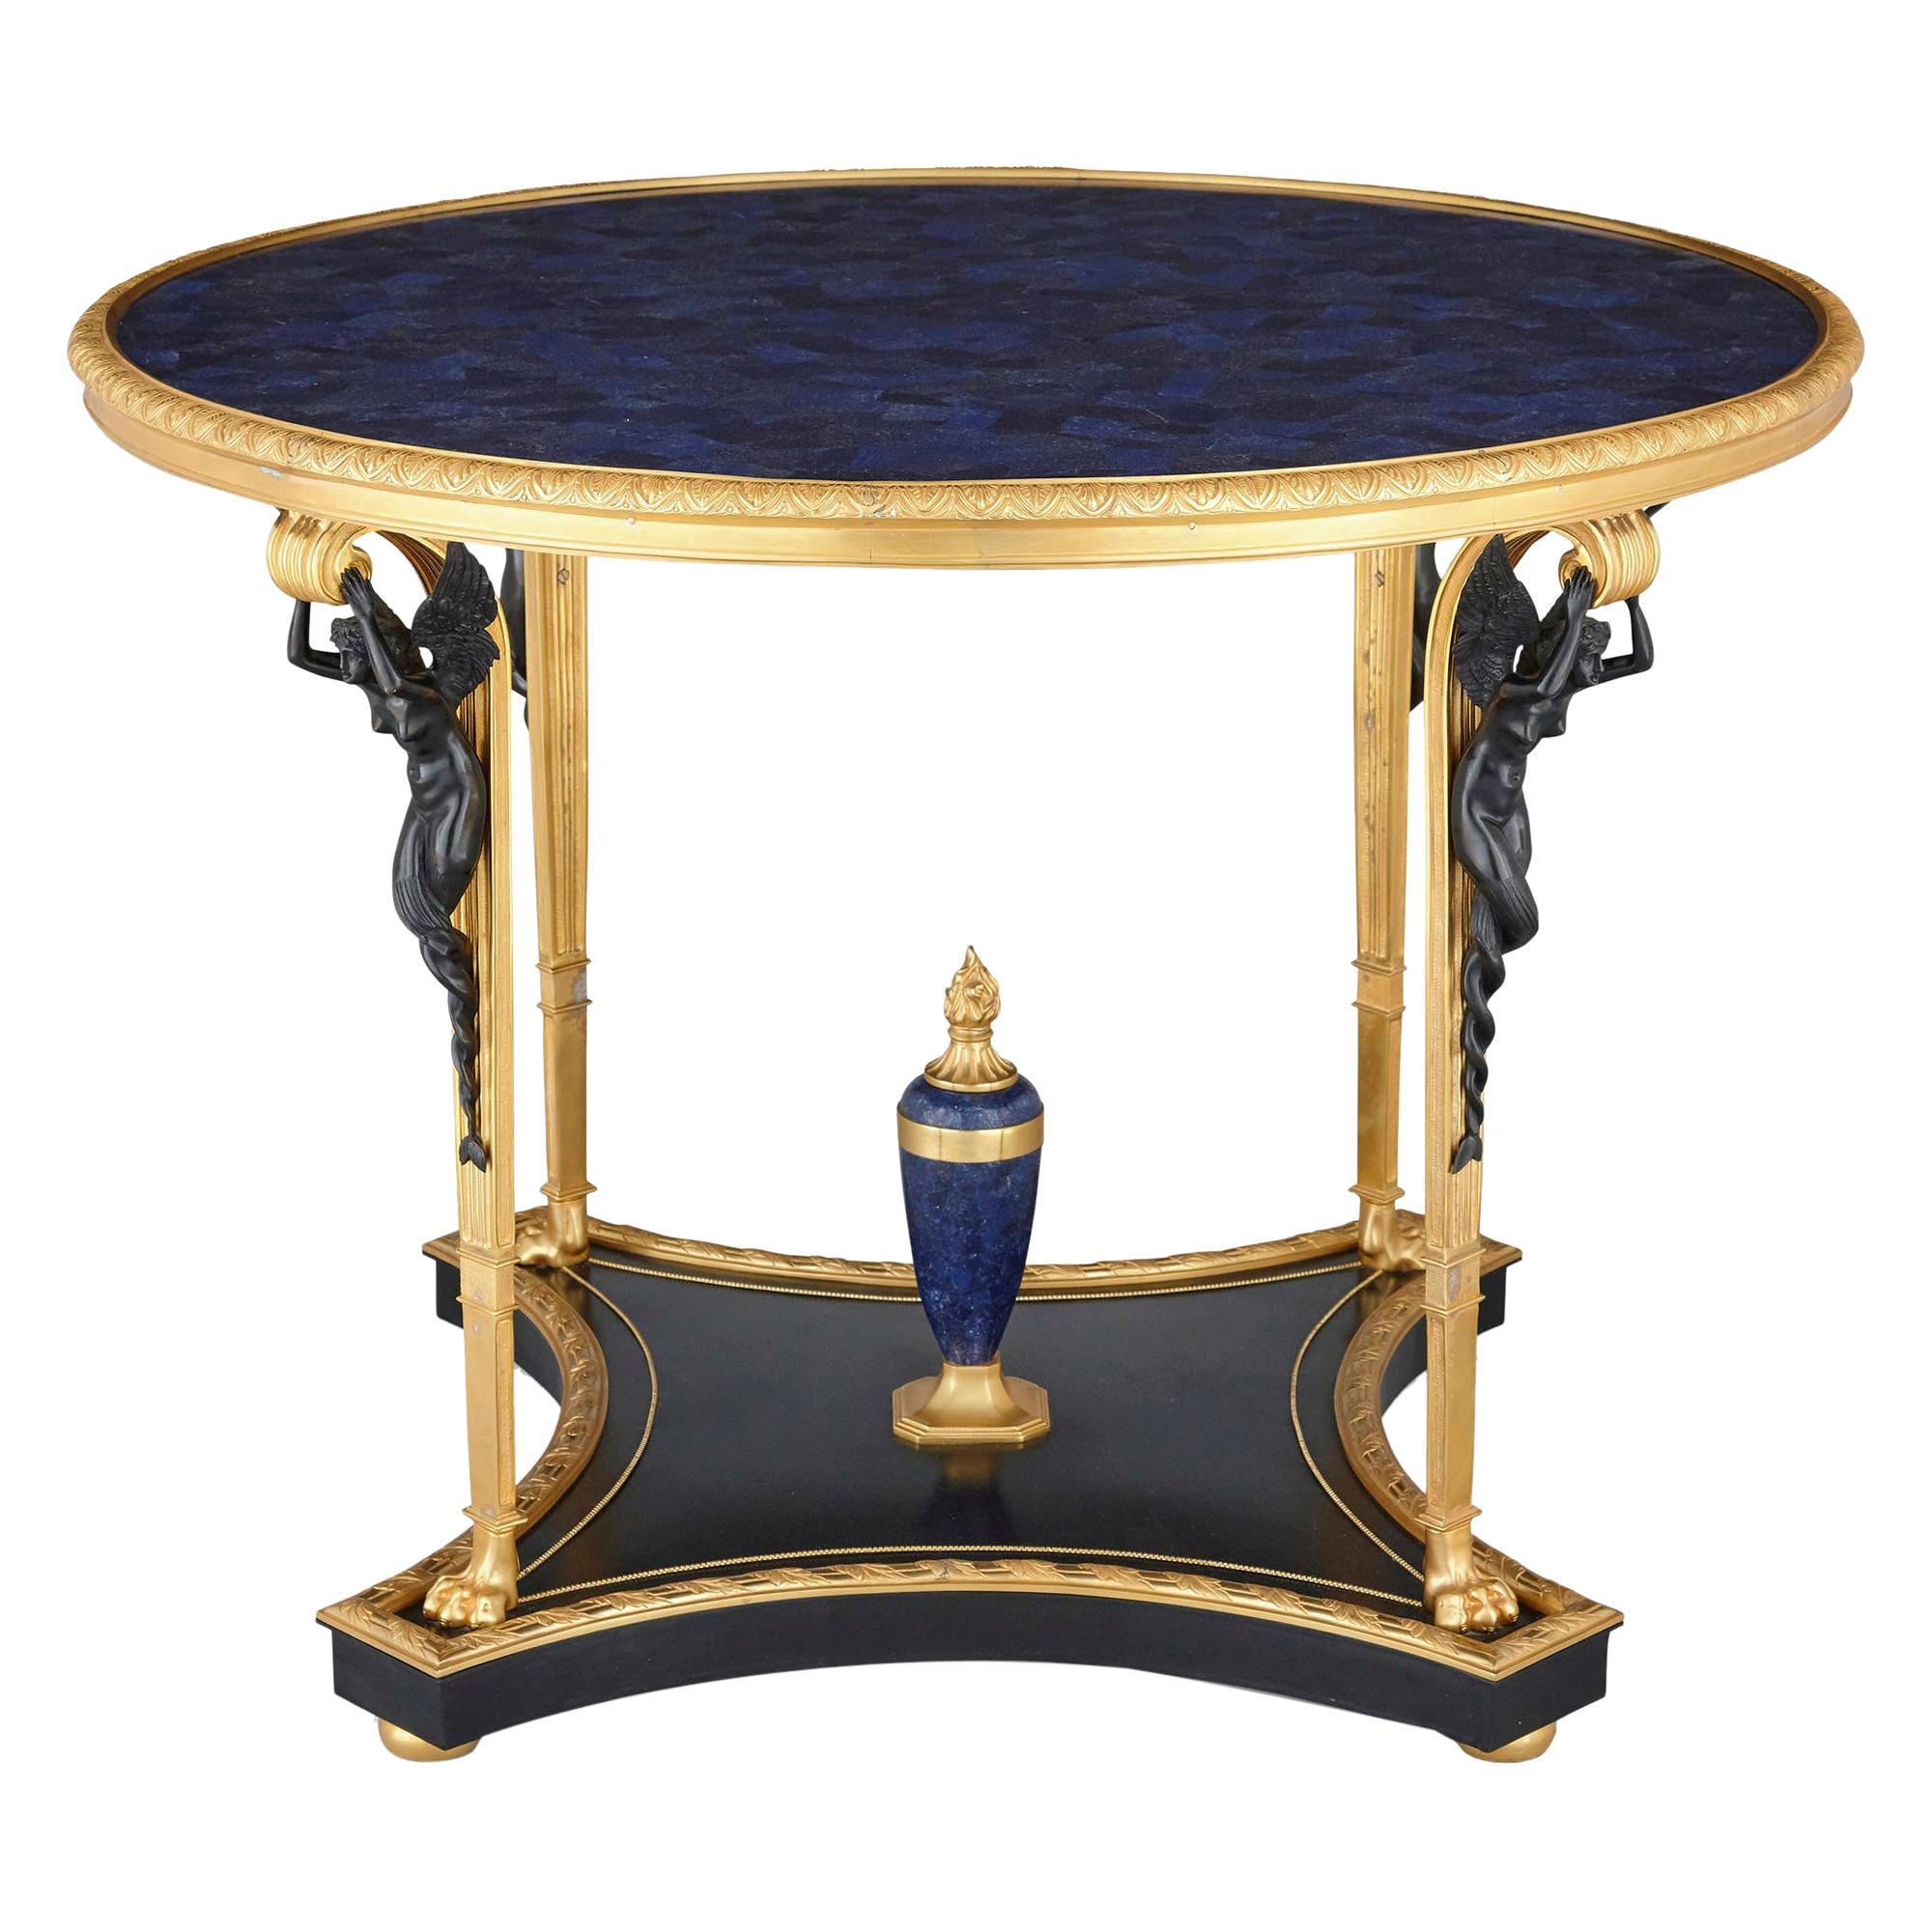 Neoclassical Empire Style Ormolu and Lapis Lazuli Table